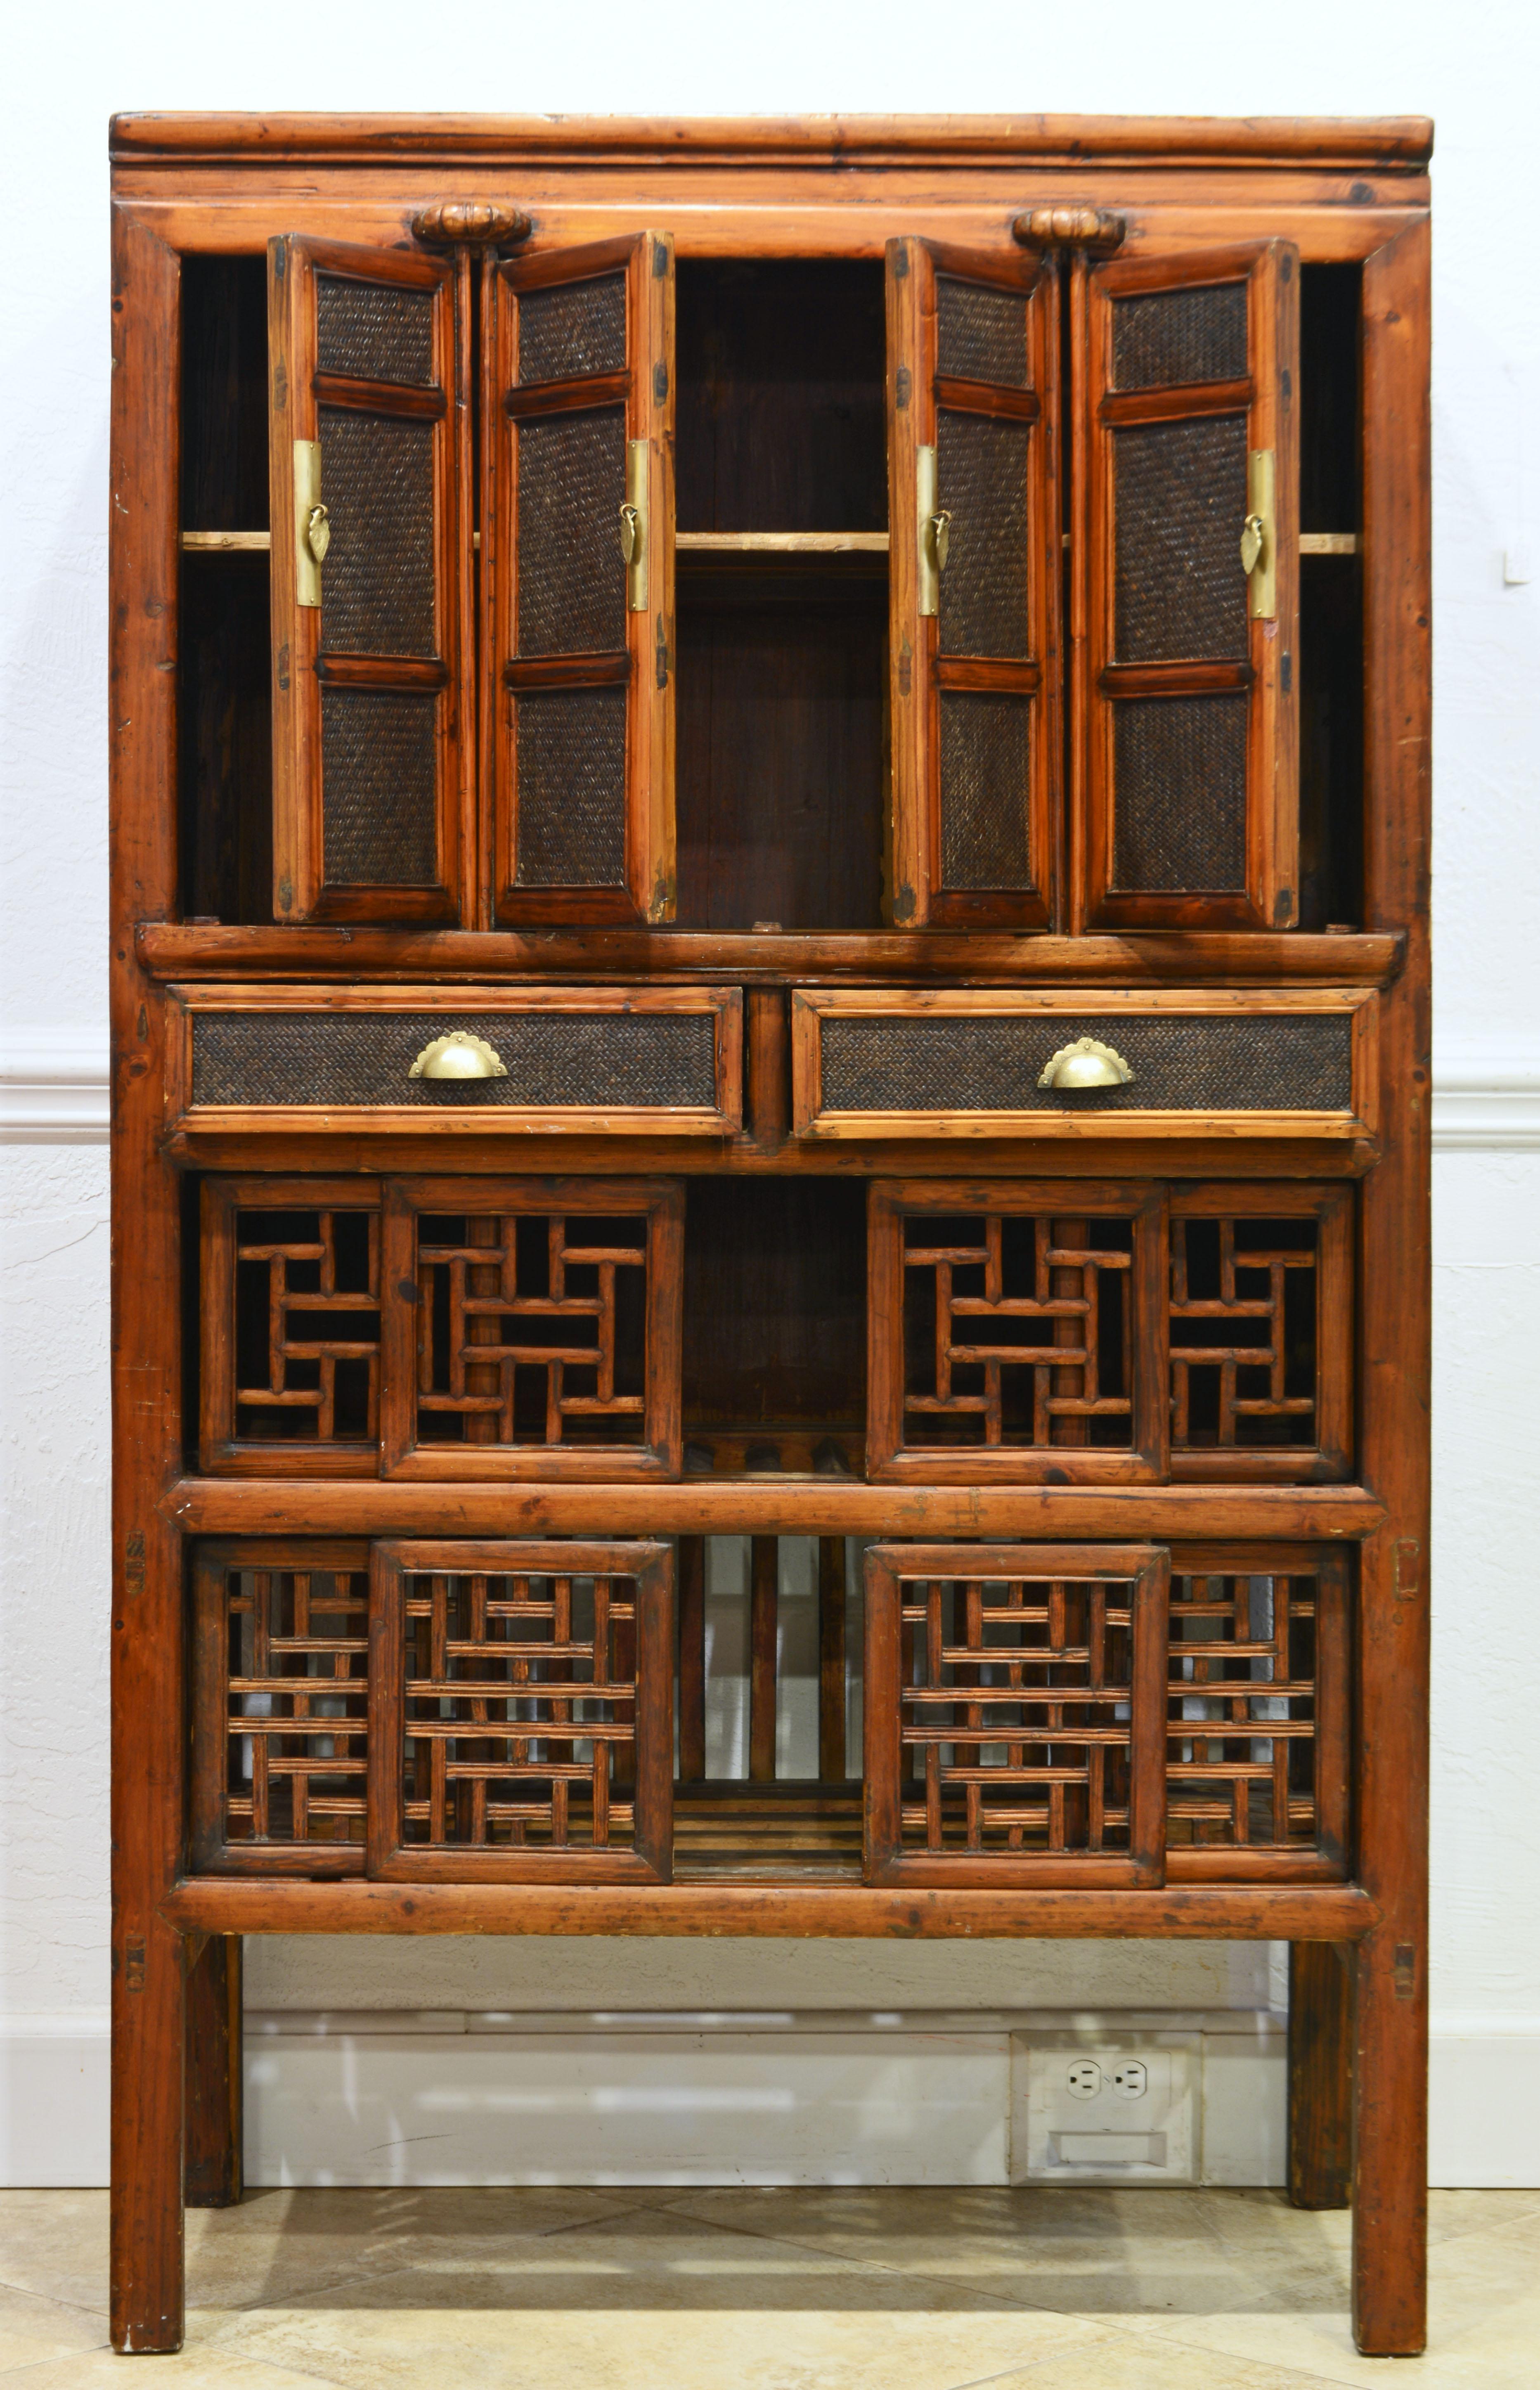 This Chinese cabinet of functional and beautiful design dates to the late 19th century. It features four cane paneled doors opening up to a shelved interior above two cane front drawers. The lower part has ornamental Chinese open work sliding doors